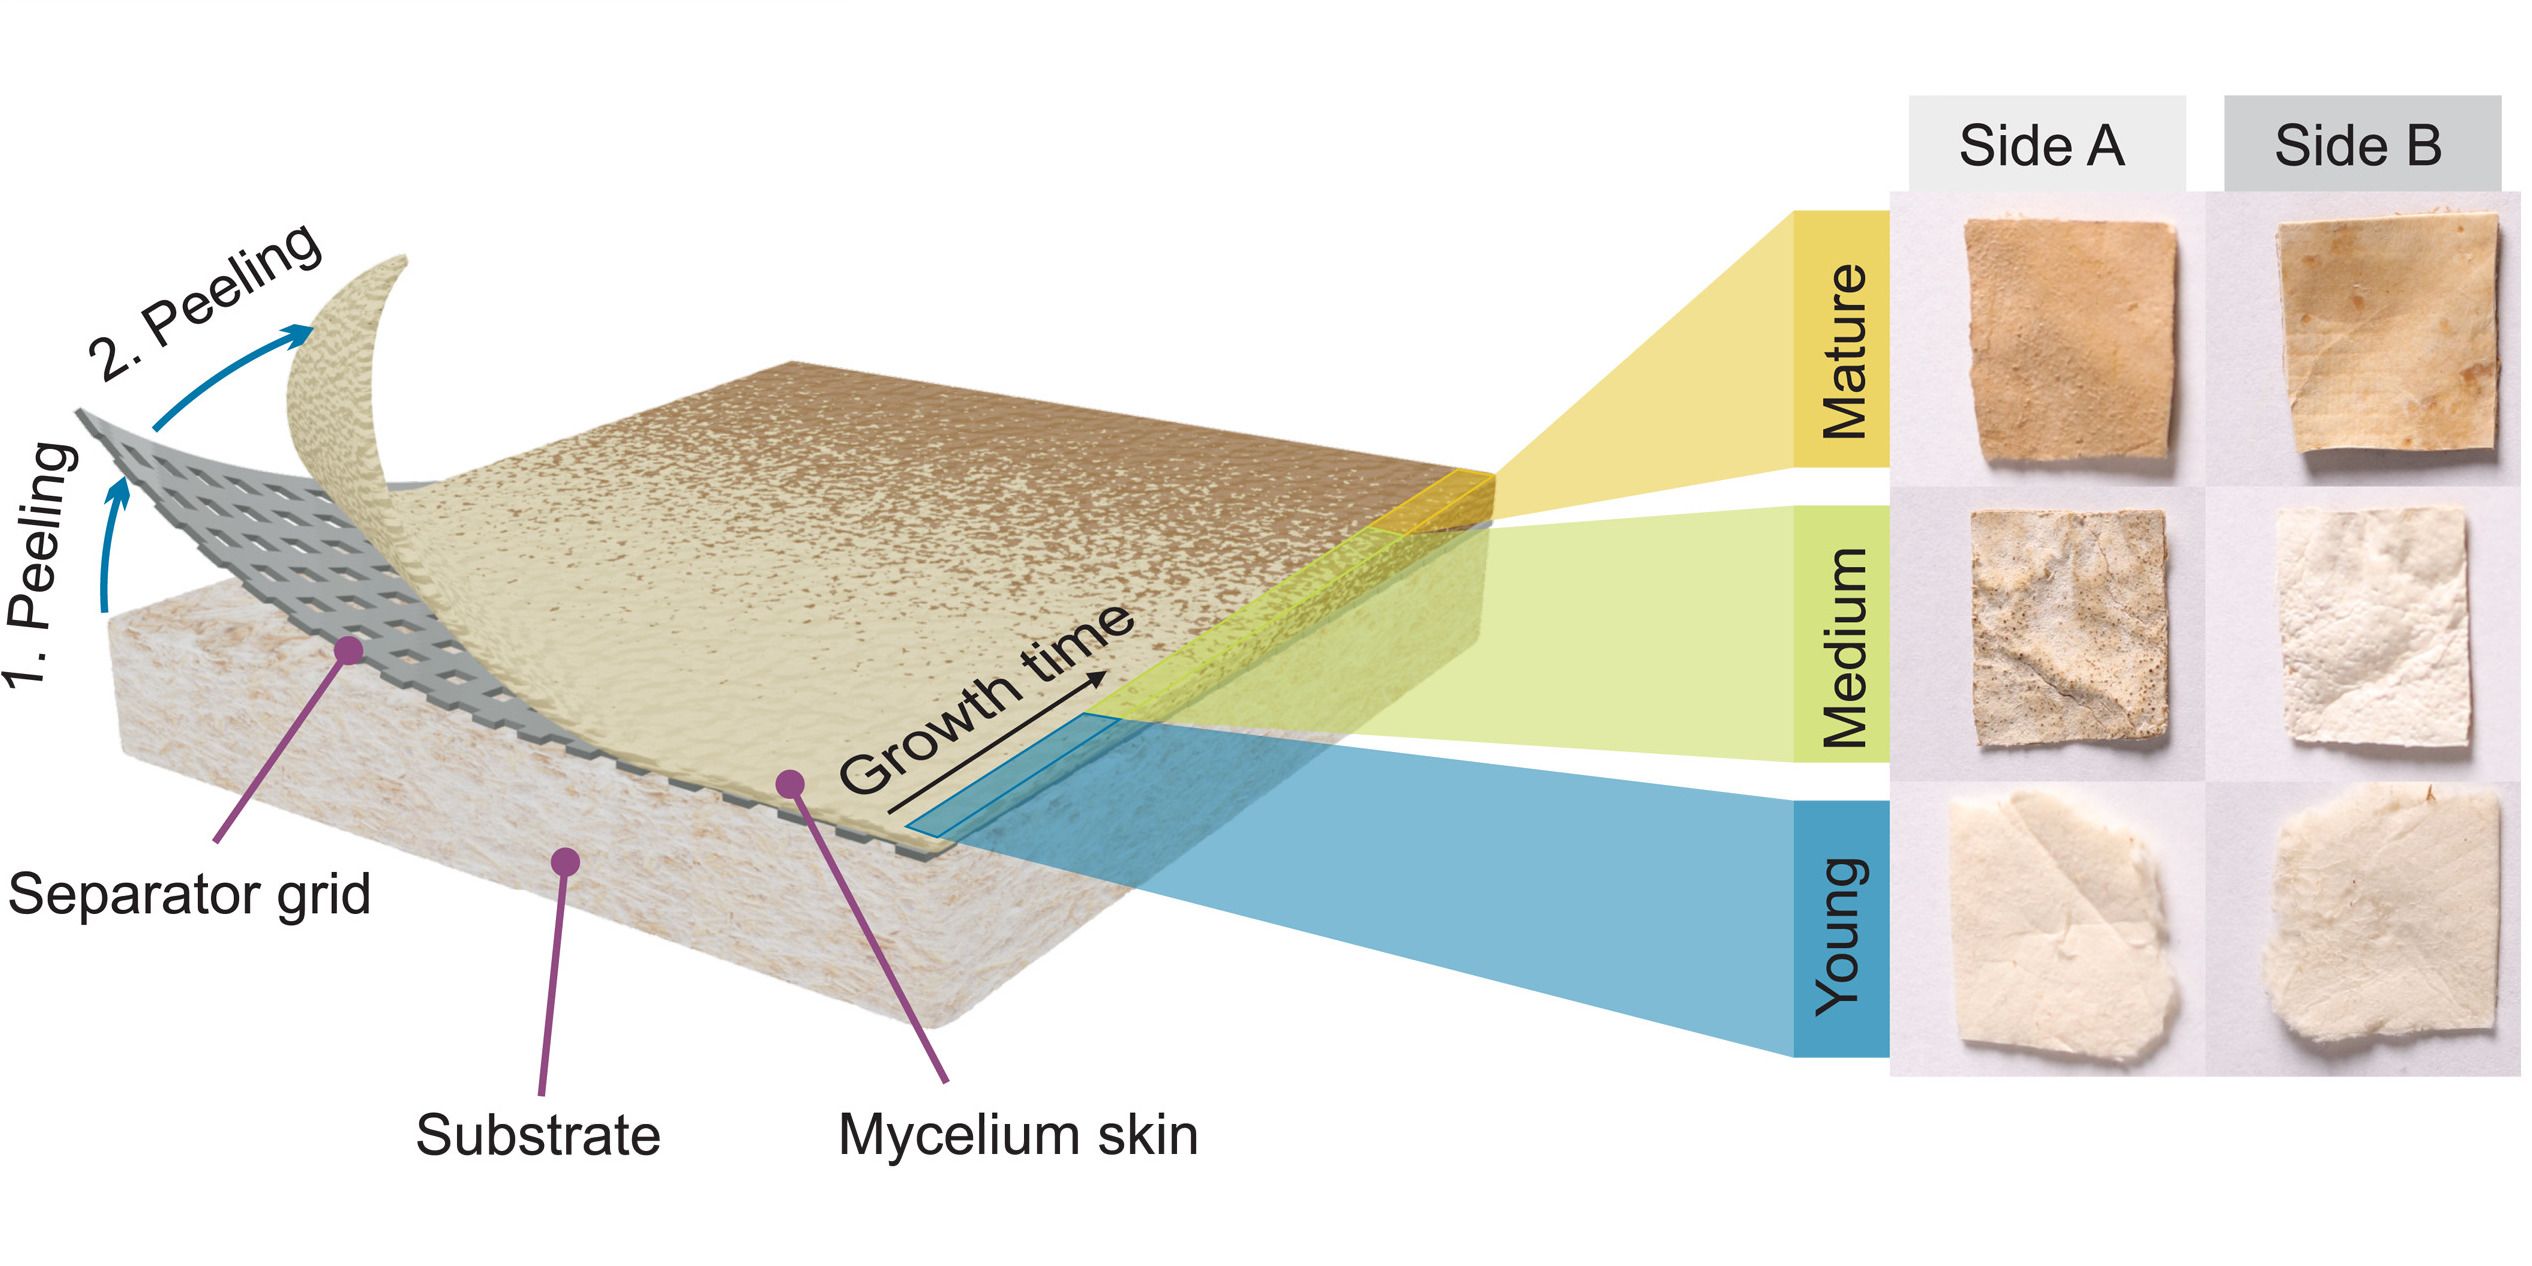 A diagram showing the different layers of the mushroom skin battery, along with the mycelium texture at different growth stages